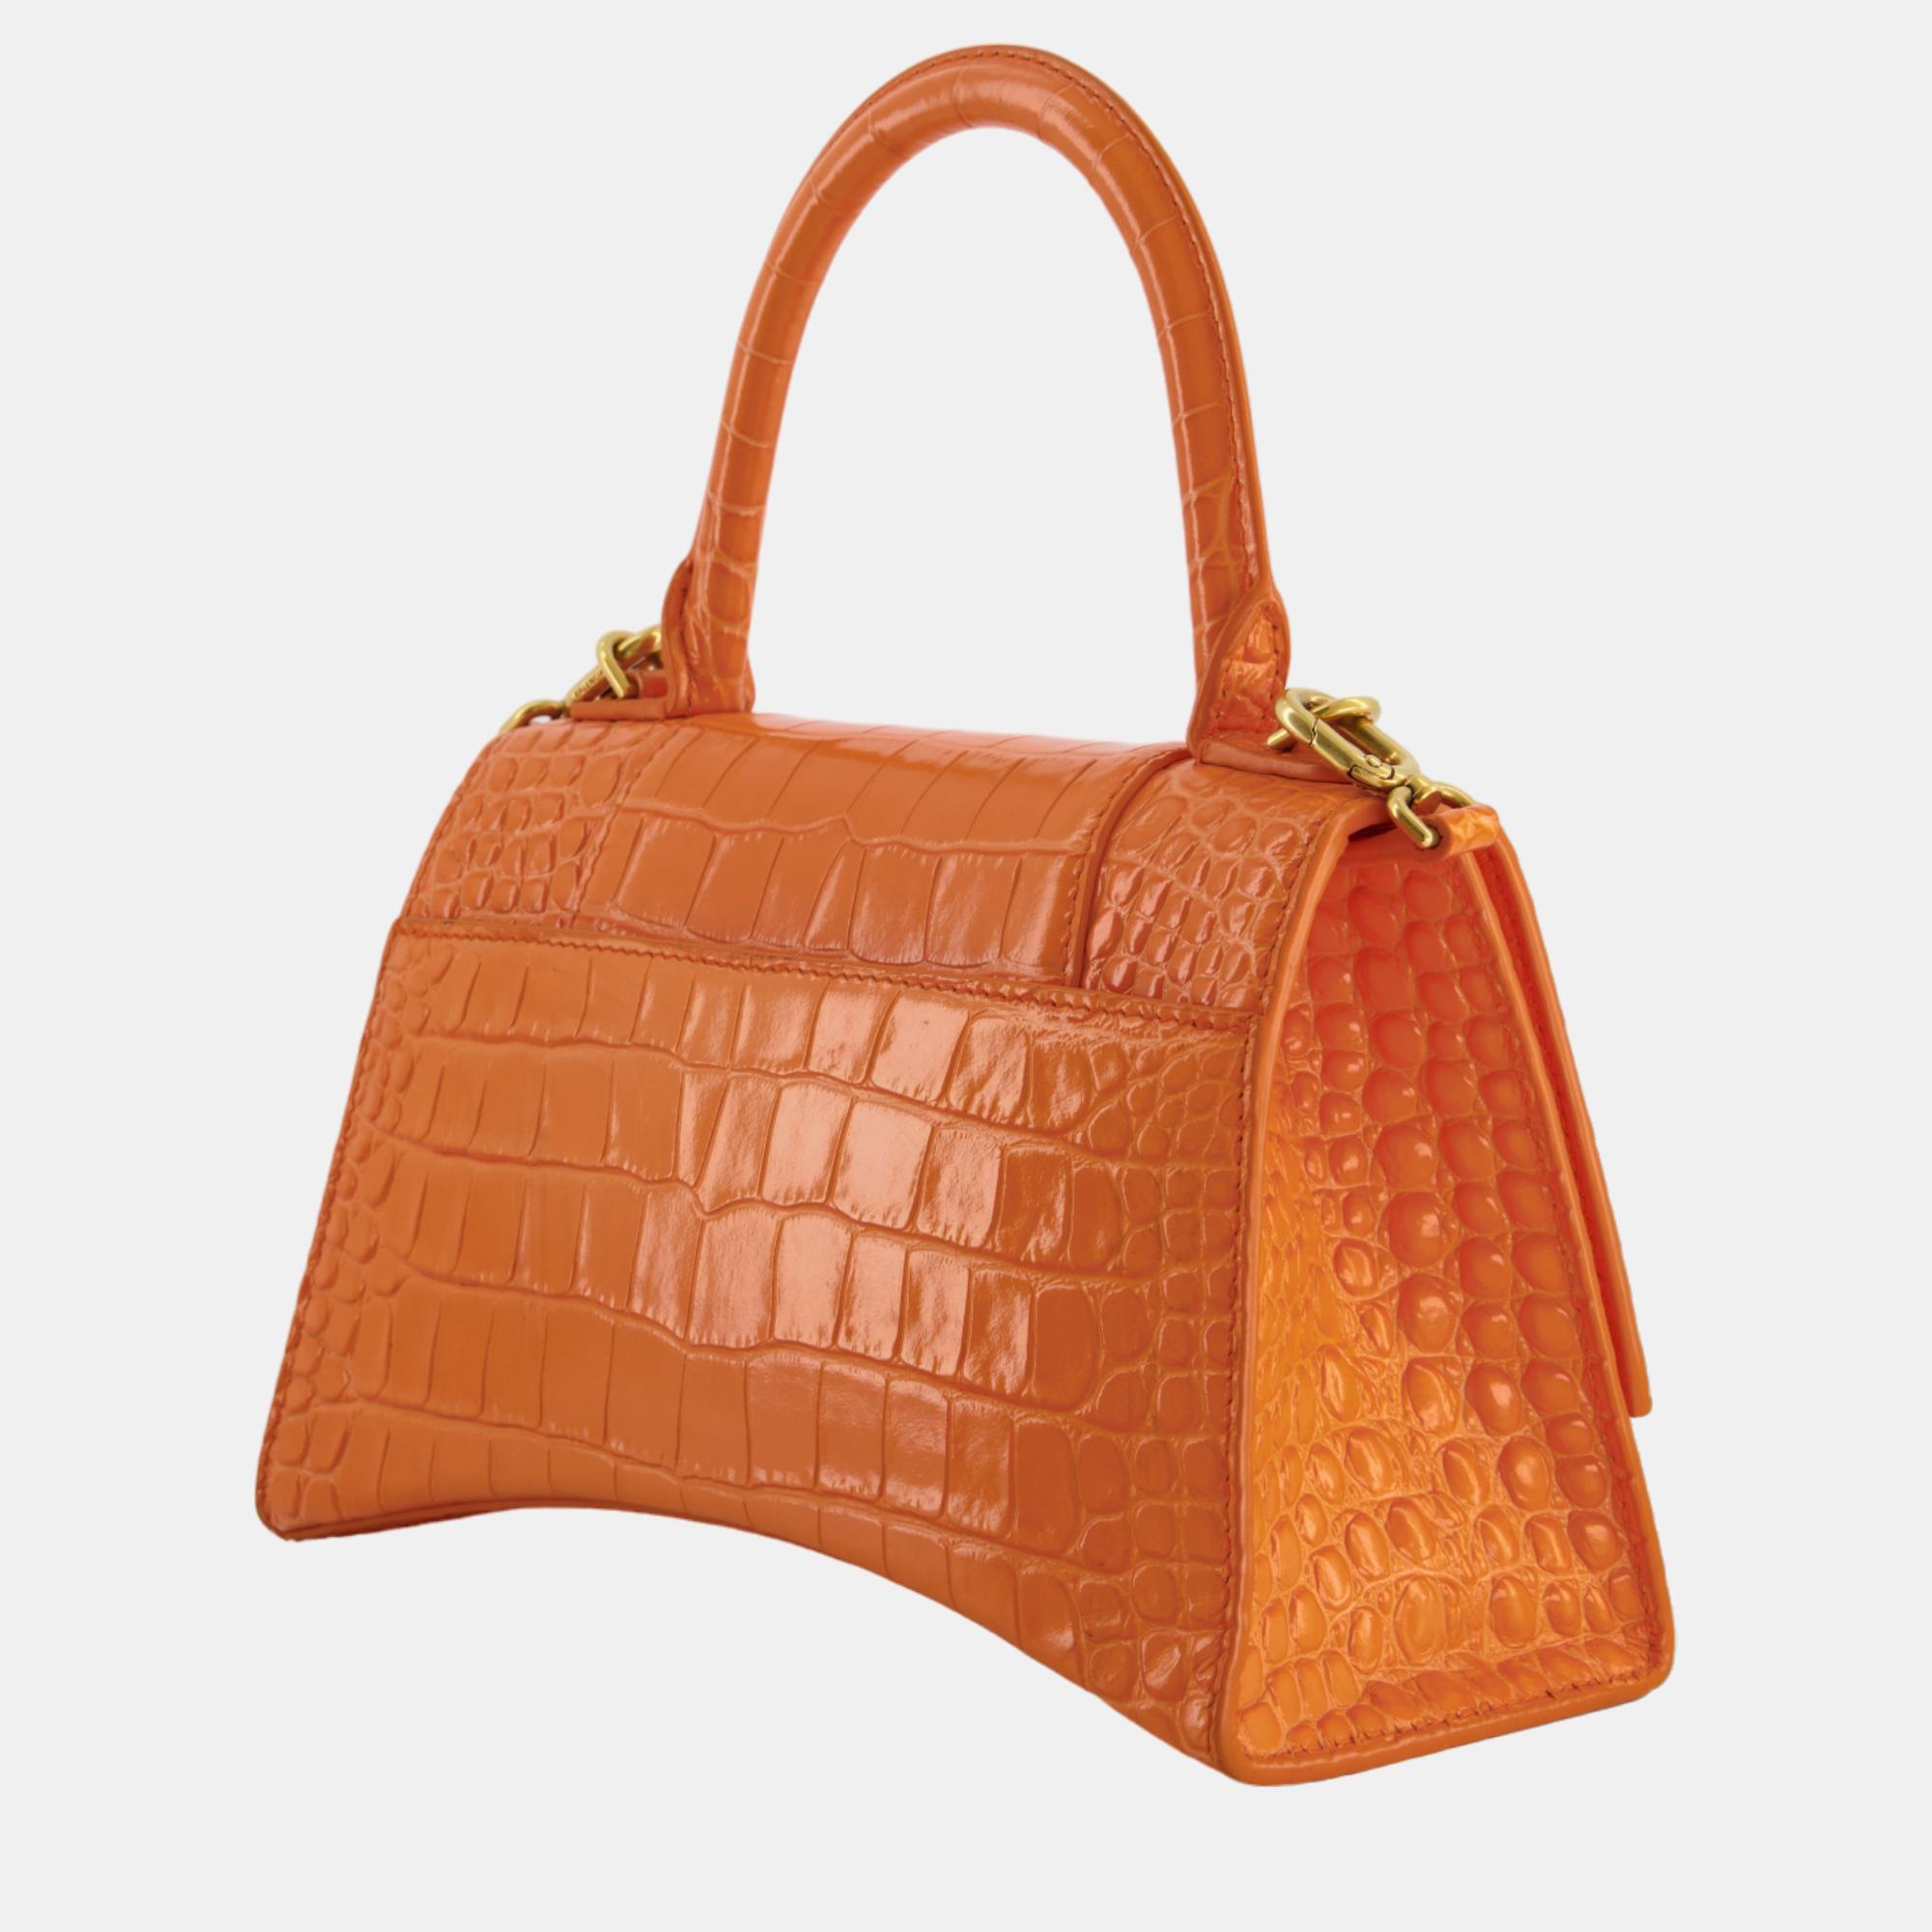 Balenciaga Orange Small Hourglass Bag In Croc Embossed Calf Leather With Gold Hardware